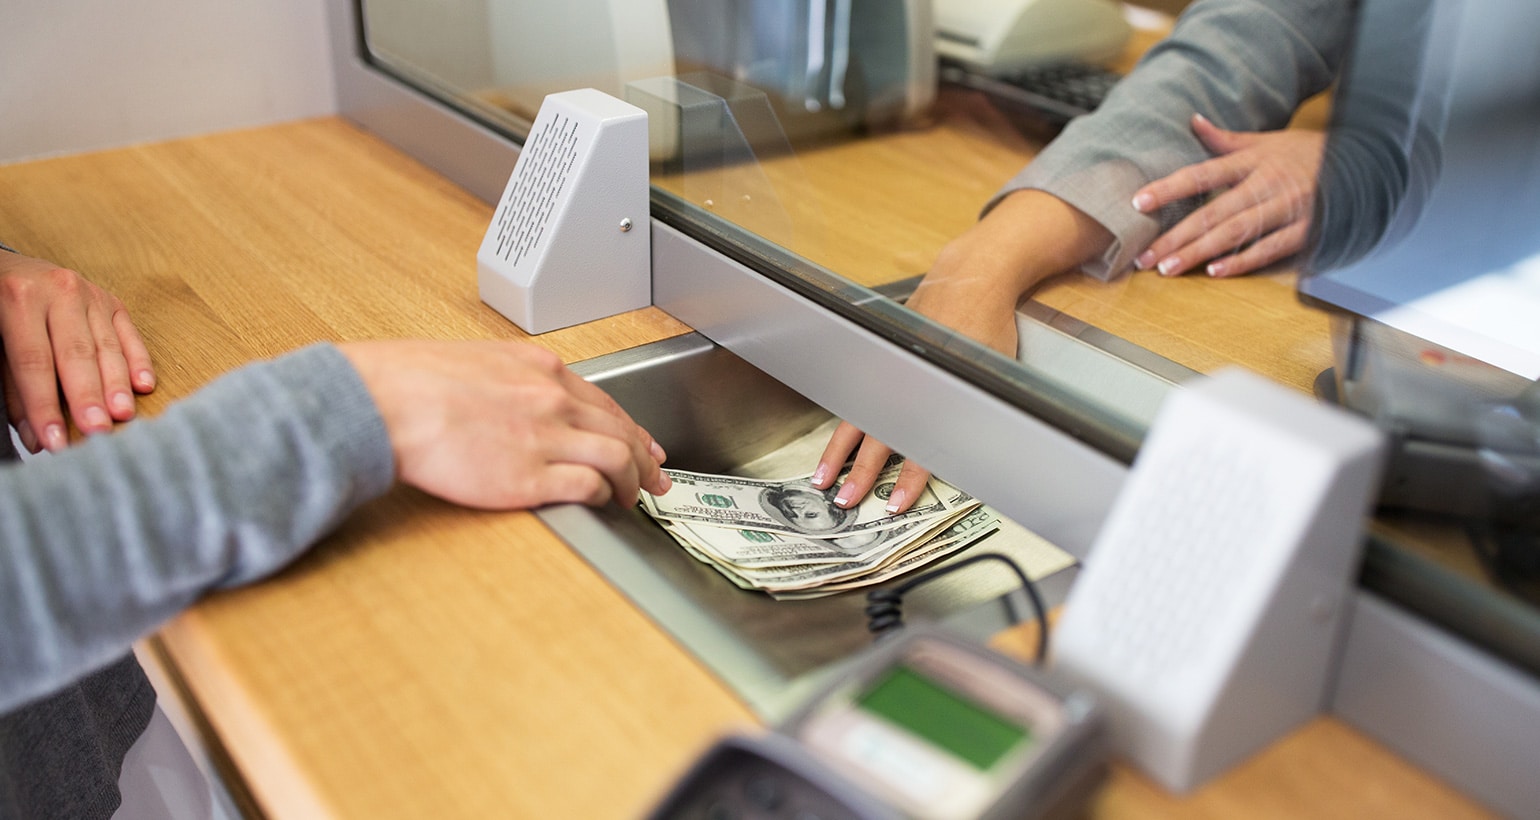 A person receieves cash from a bank teller.